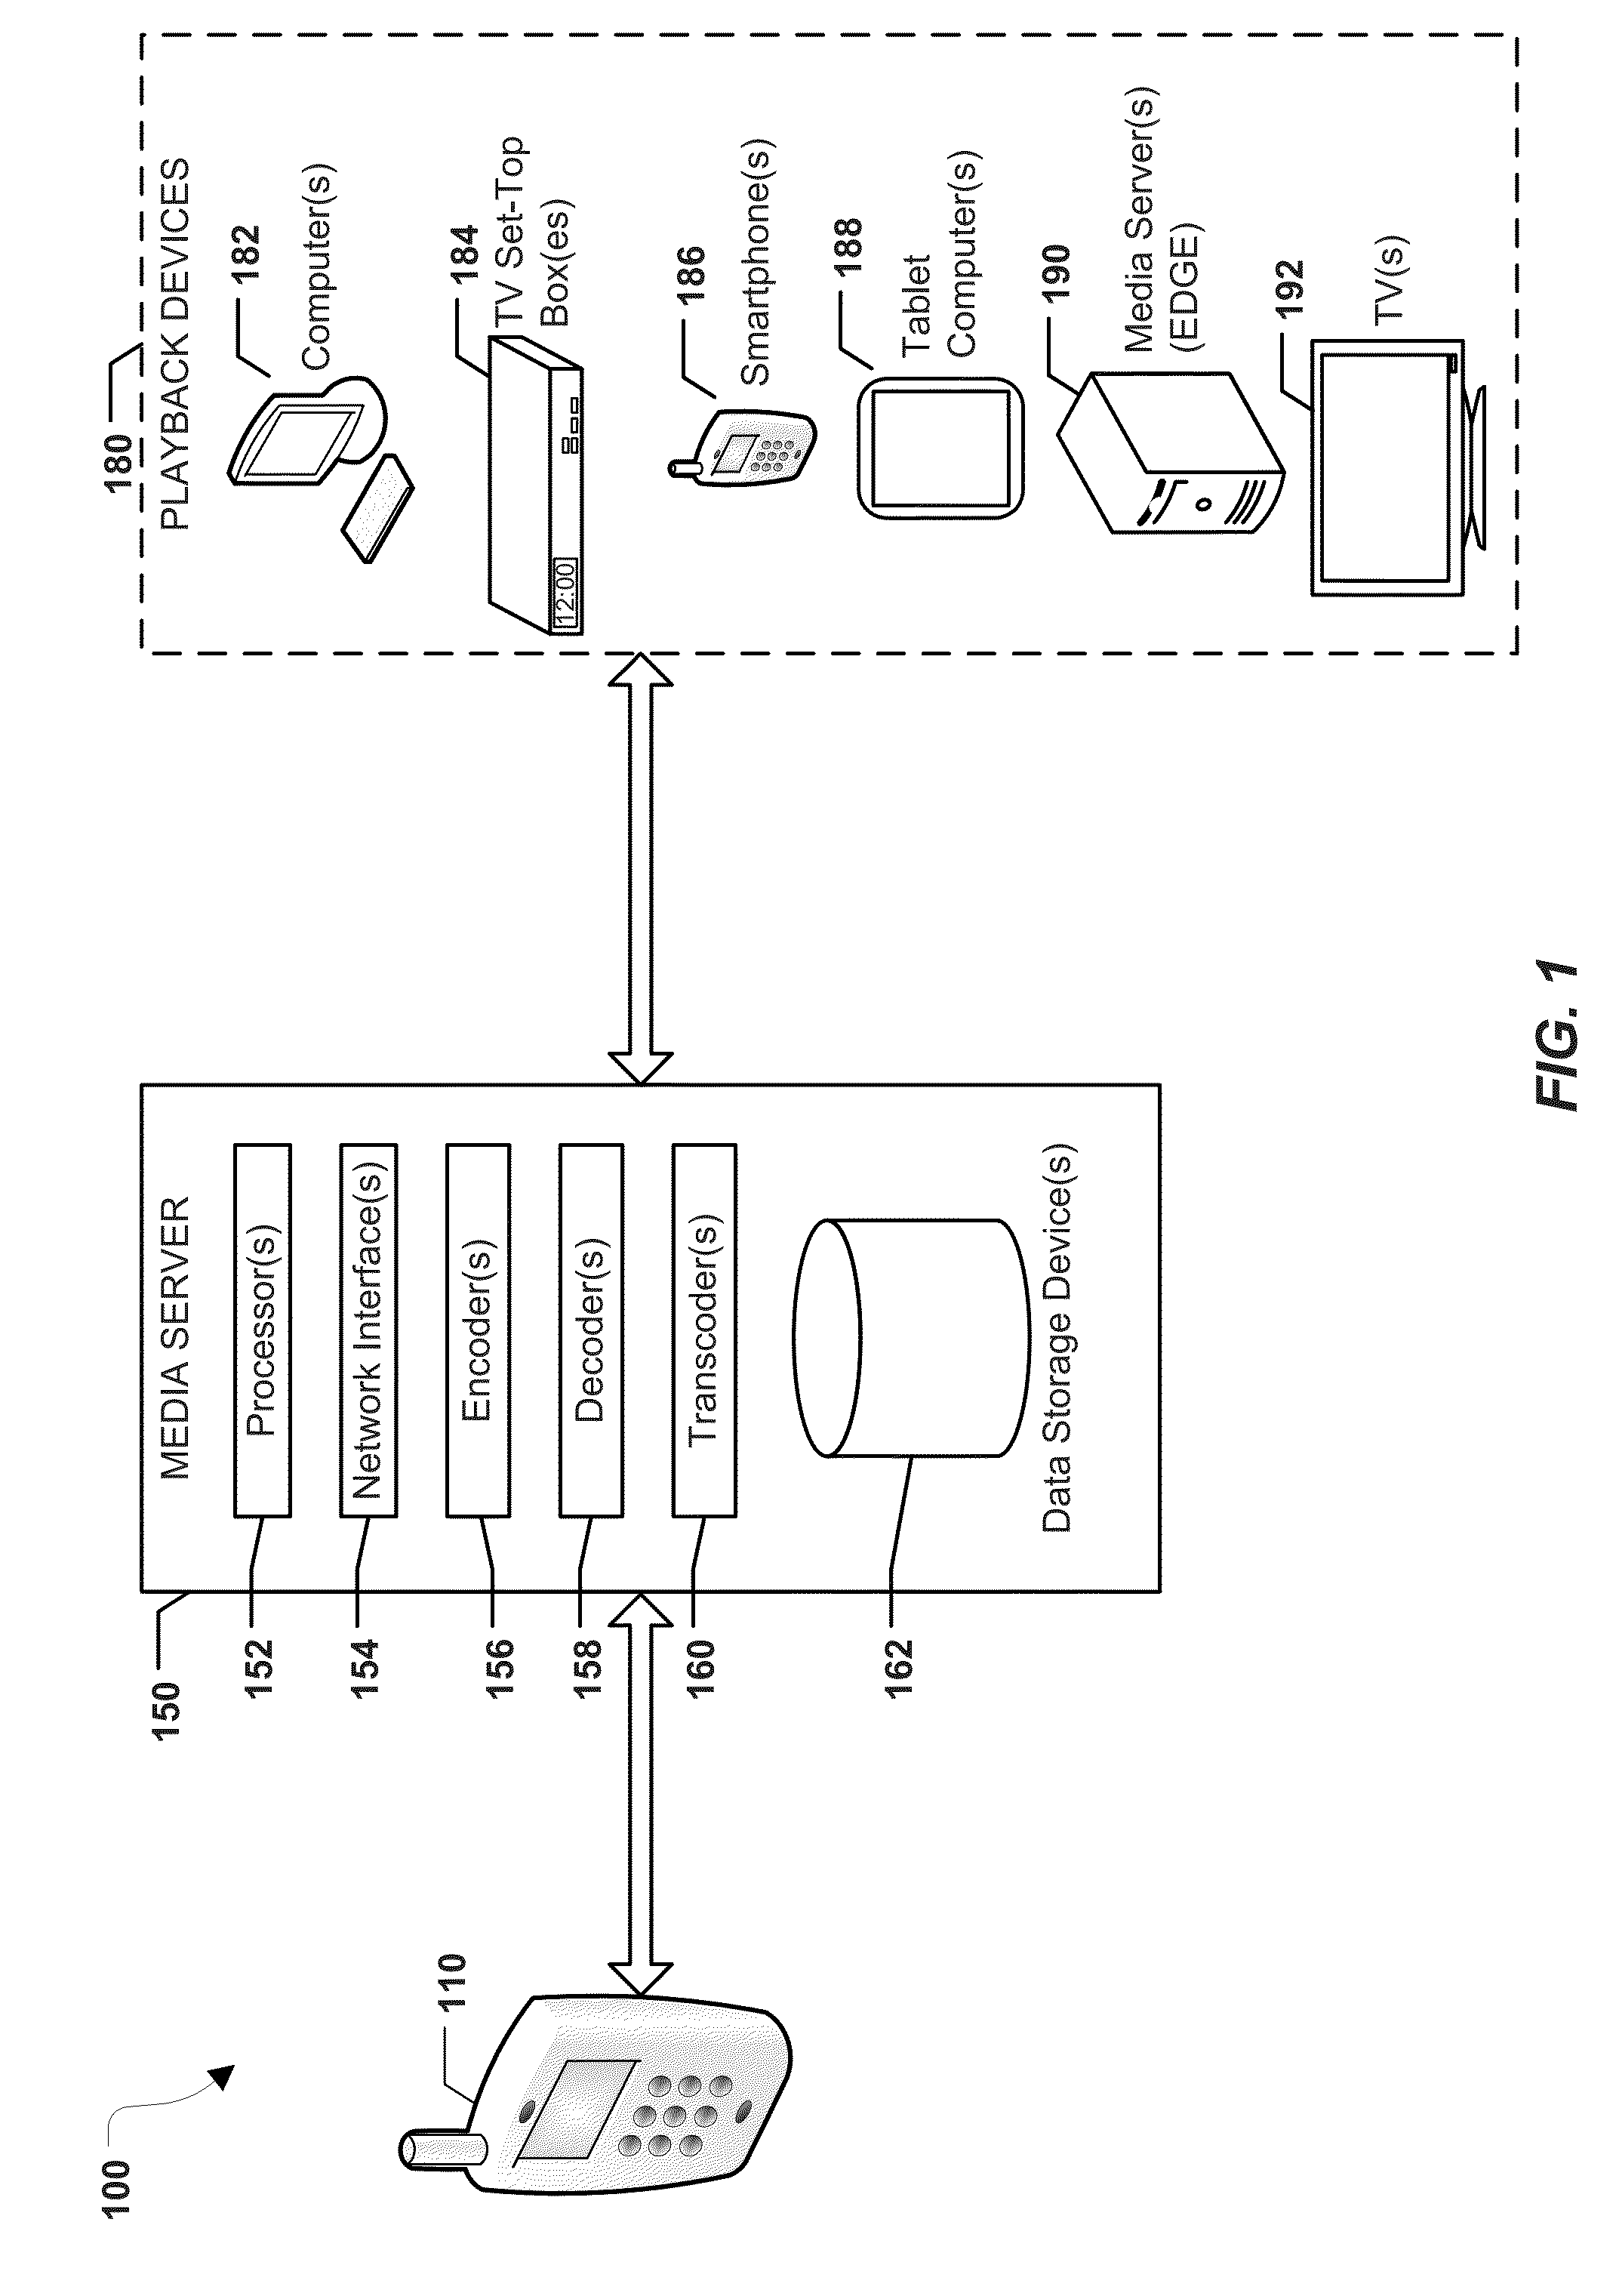 Adjusting encoding parameters at a mobile device based on a change in available network bandwidth